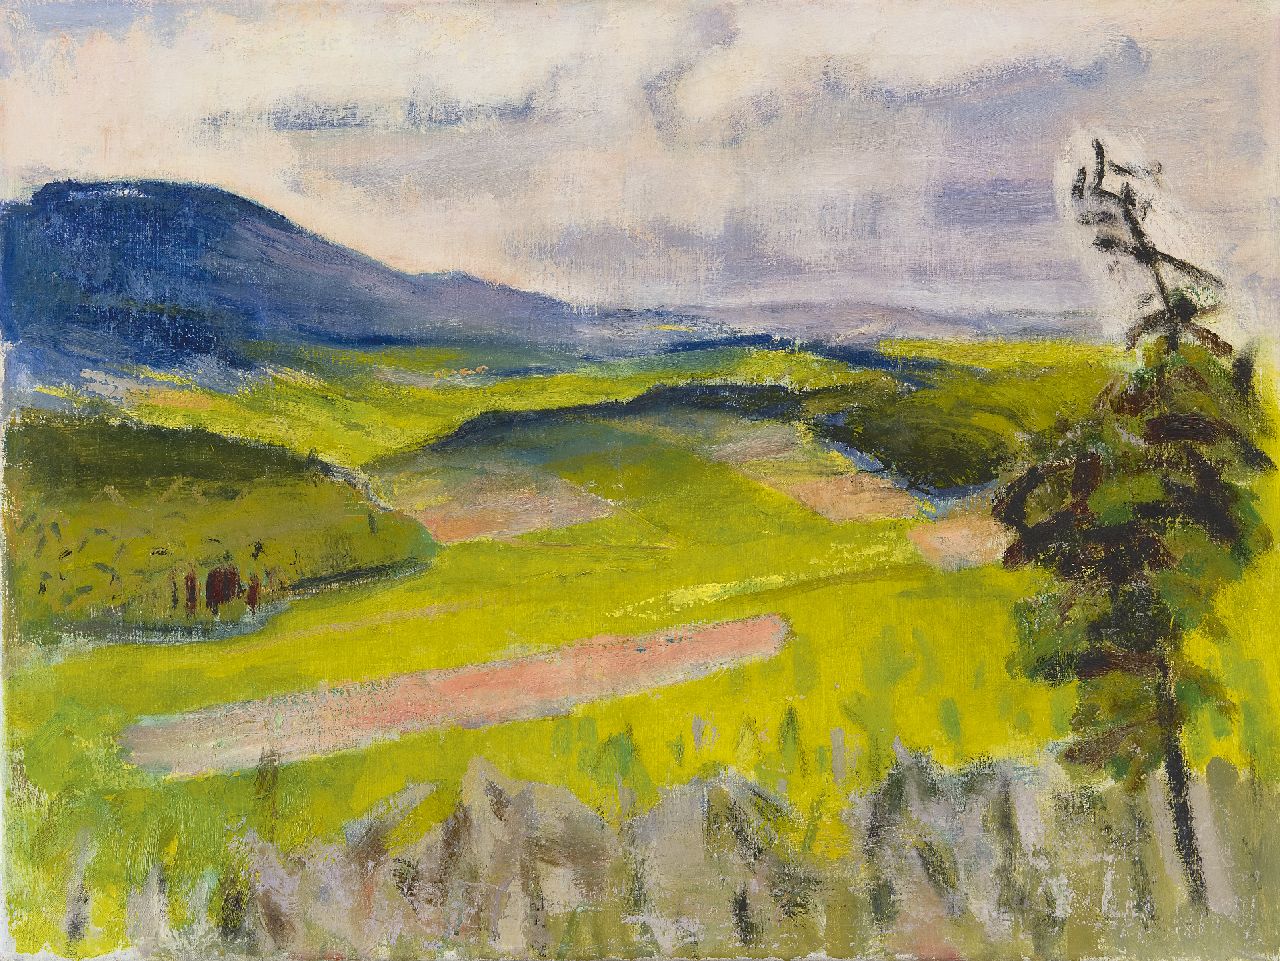 Altink J.  | Jan Altink, Landscape in the Weser Hills, oil on canvas 60.0 x 80.3 cm, painted ca. 1957